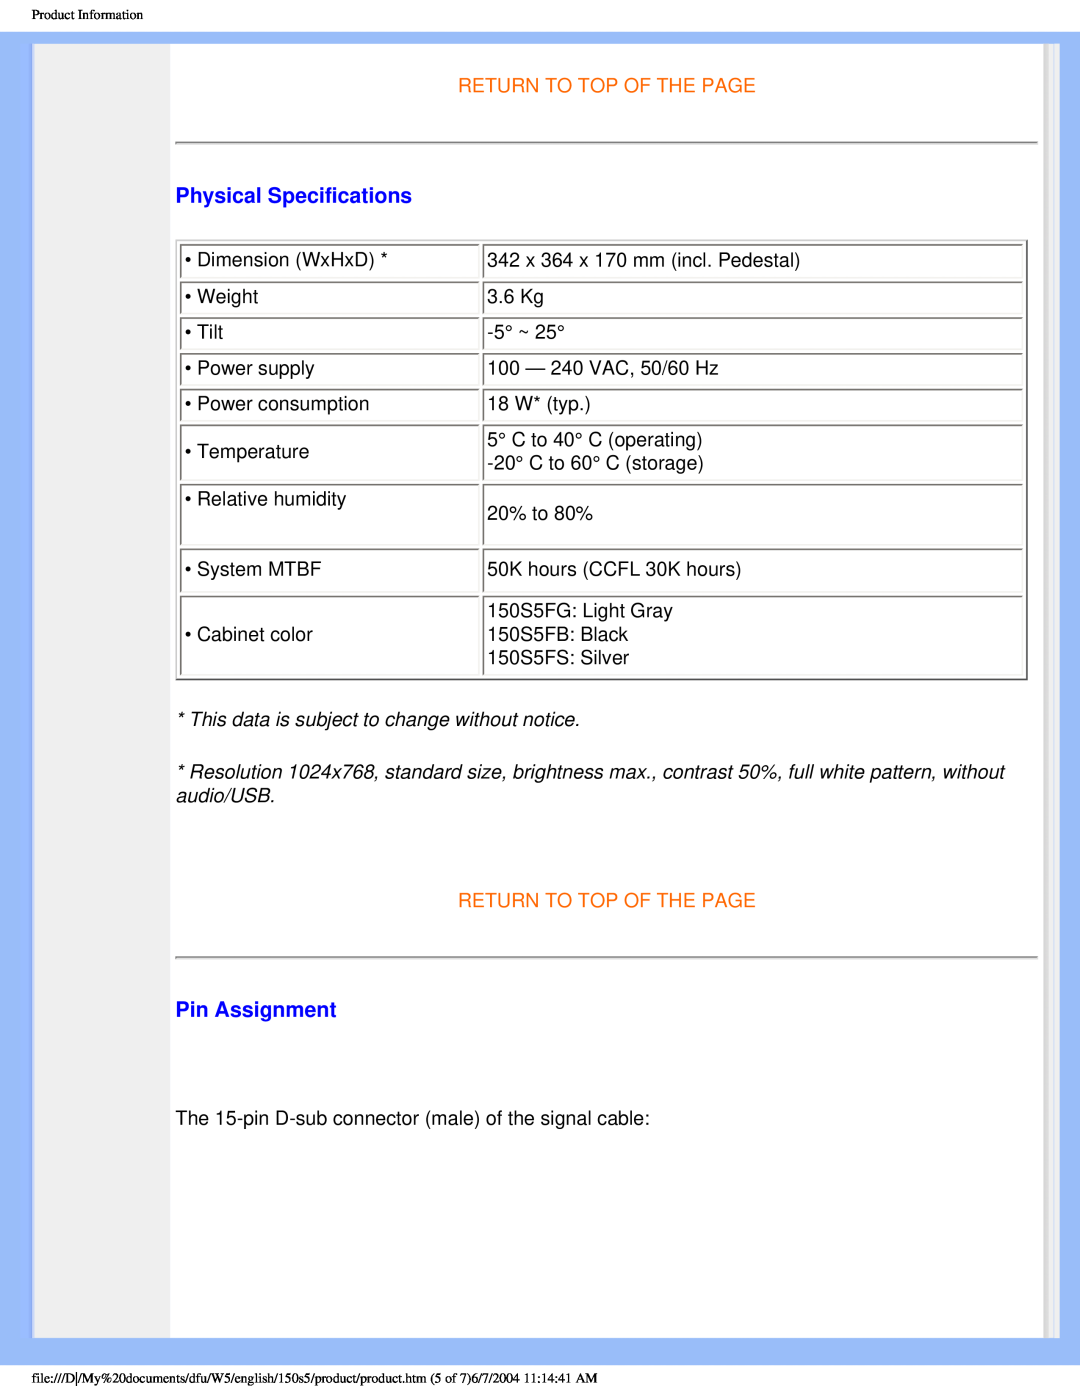 Philips 150S5FS user manual Physical Specifications, Pin Assignment, Return To Top Of The Page 